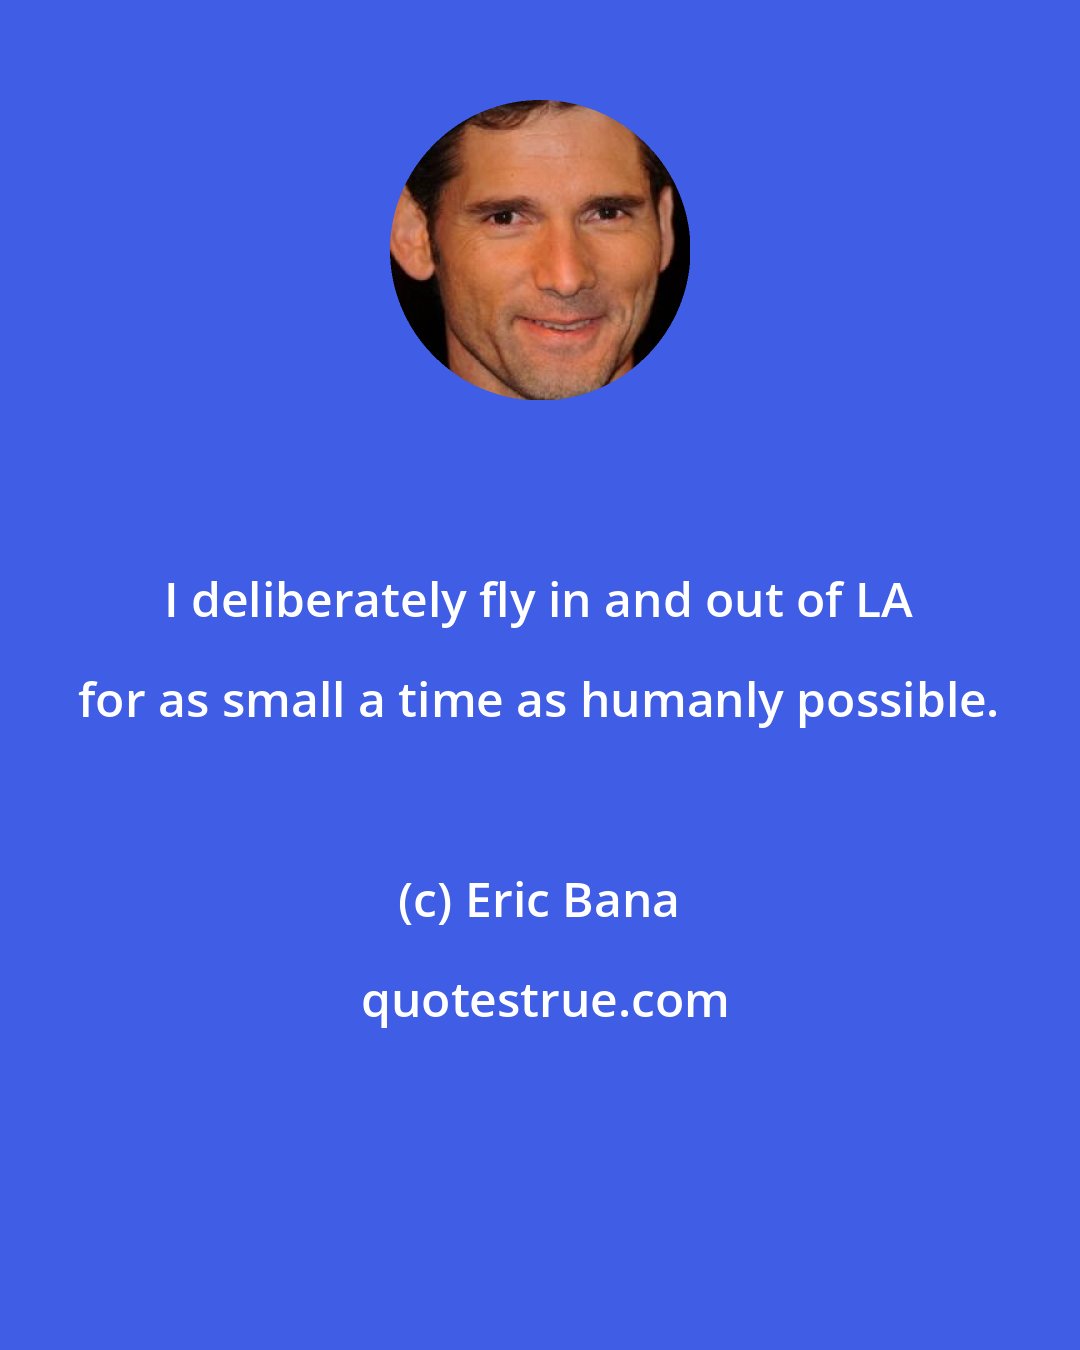 Eric Bana: I deliberately fly in and out of LA for as small a time as humanly possible.